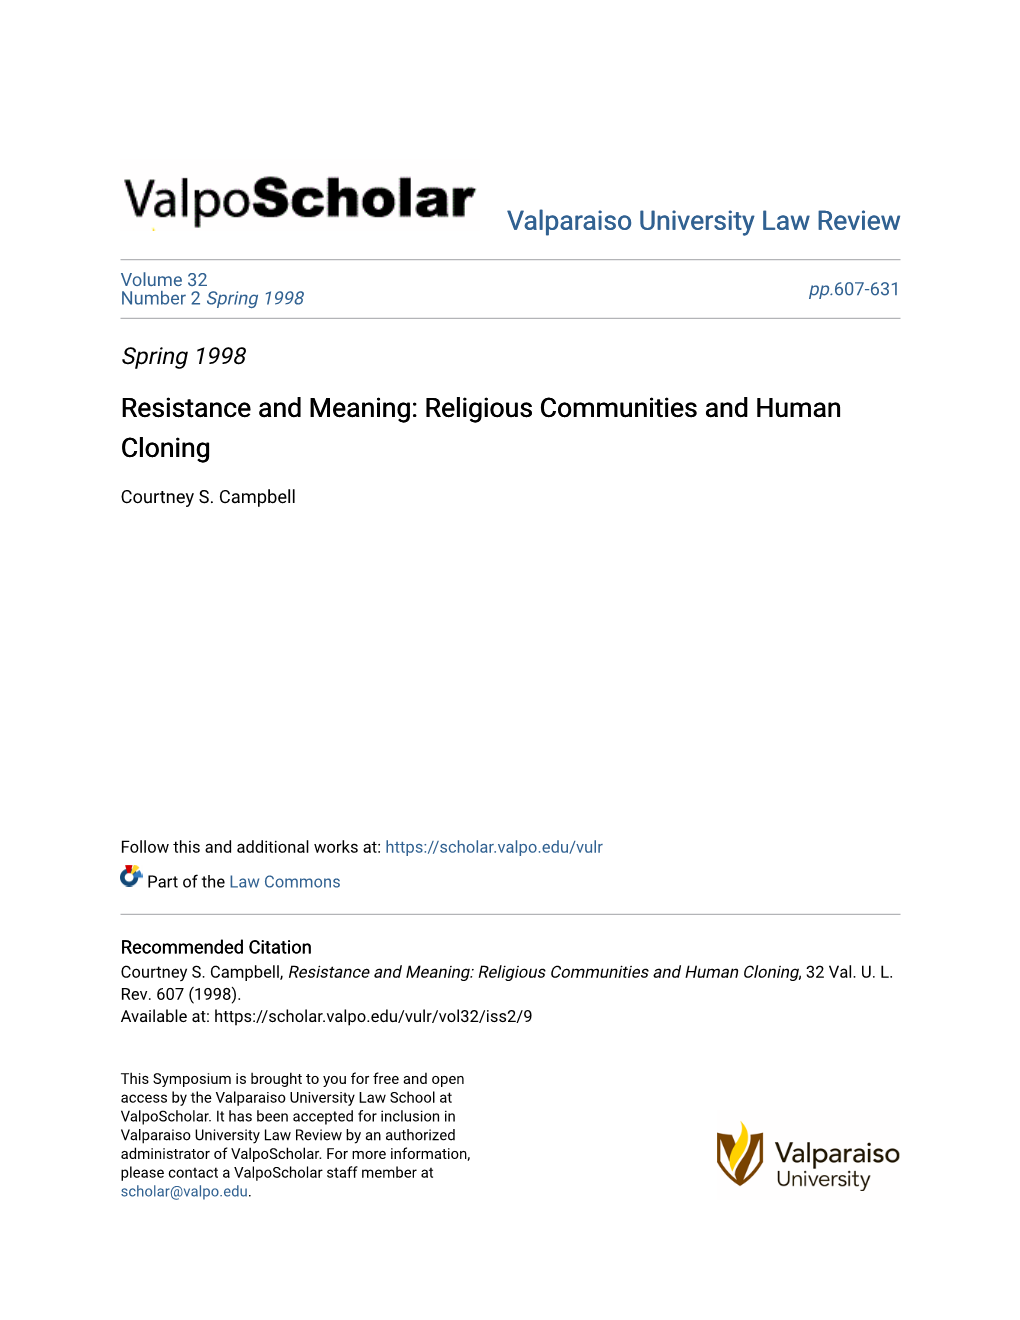 Religious Communities and Human Cloning